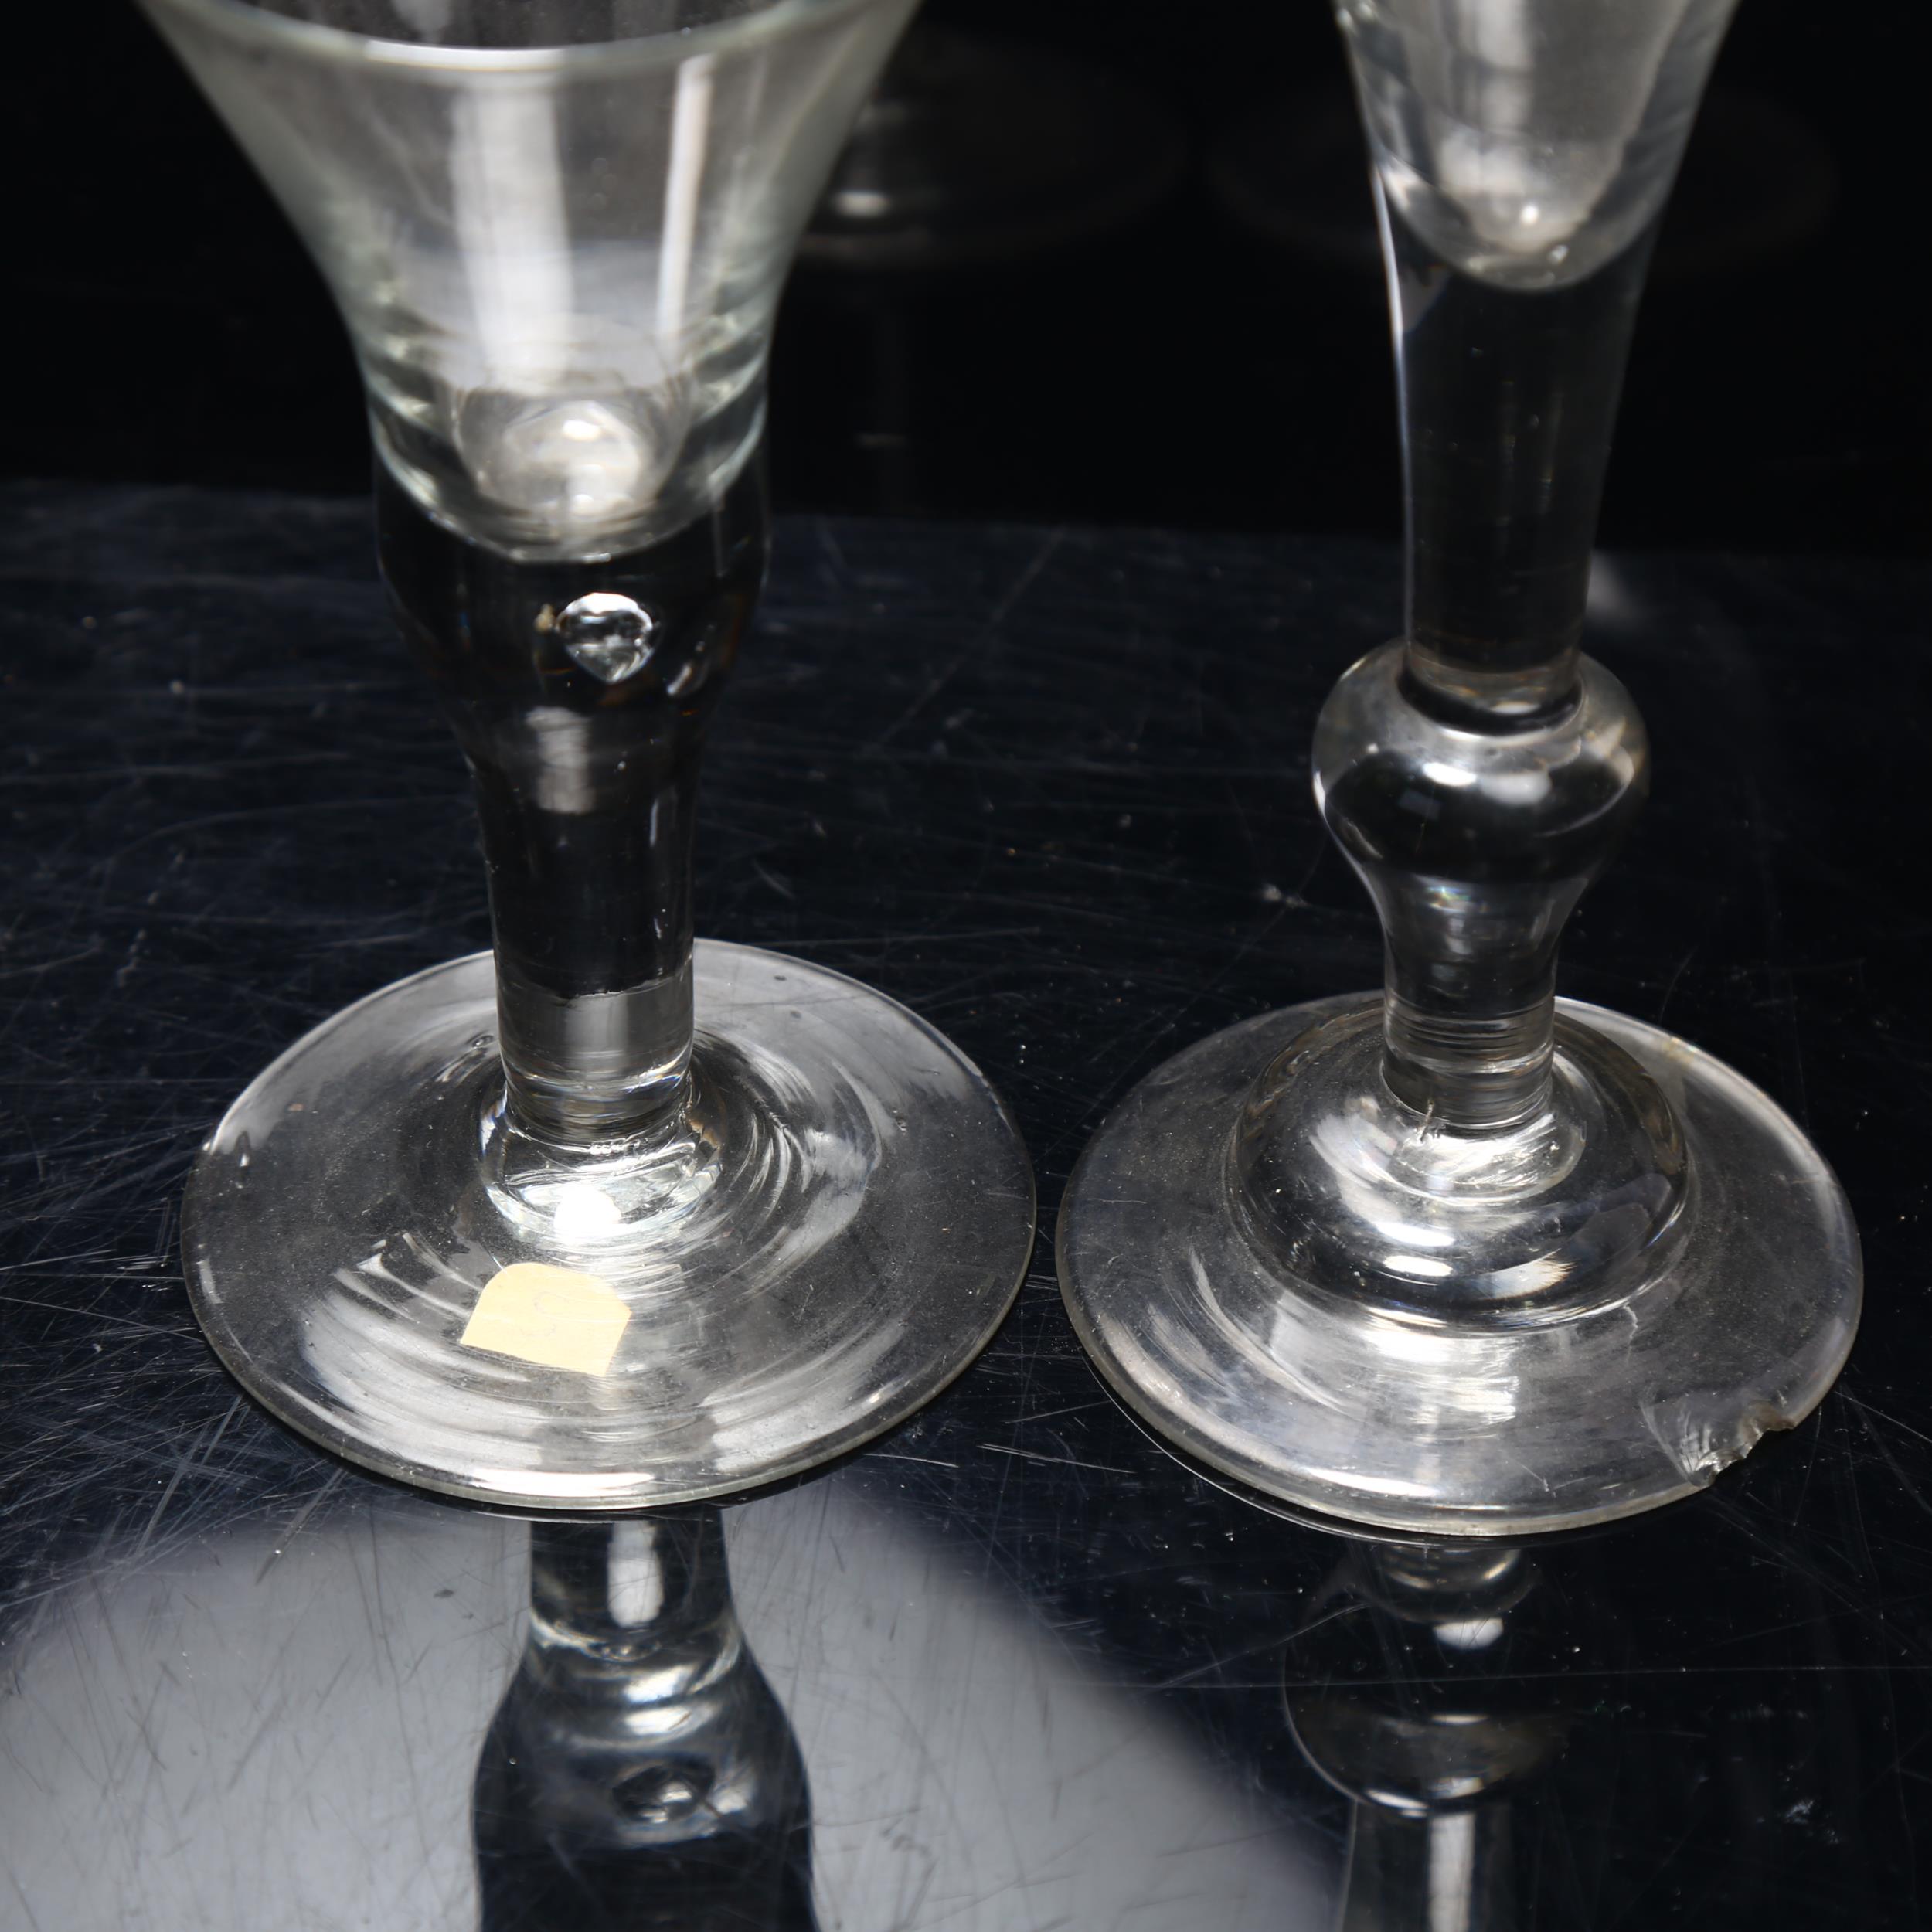 2 x 18th century funnel-shaped glasses, largest height 19cm Tallest glass has chip under the foot, - Image 2 of 3